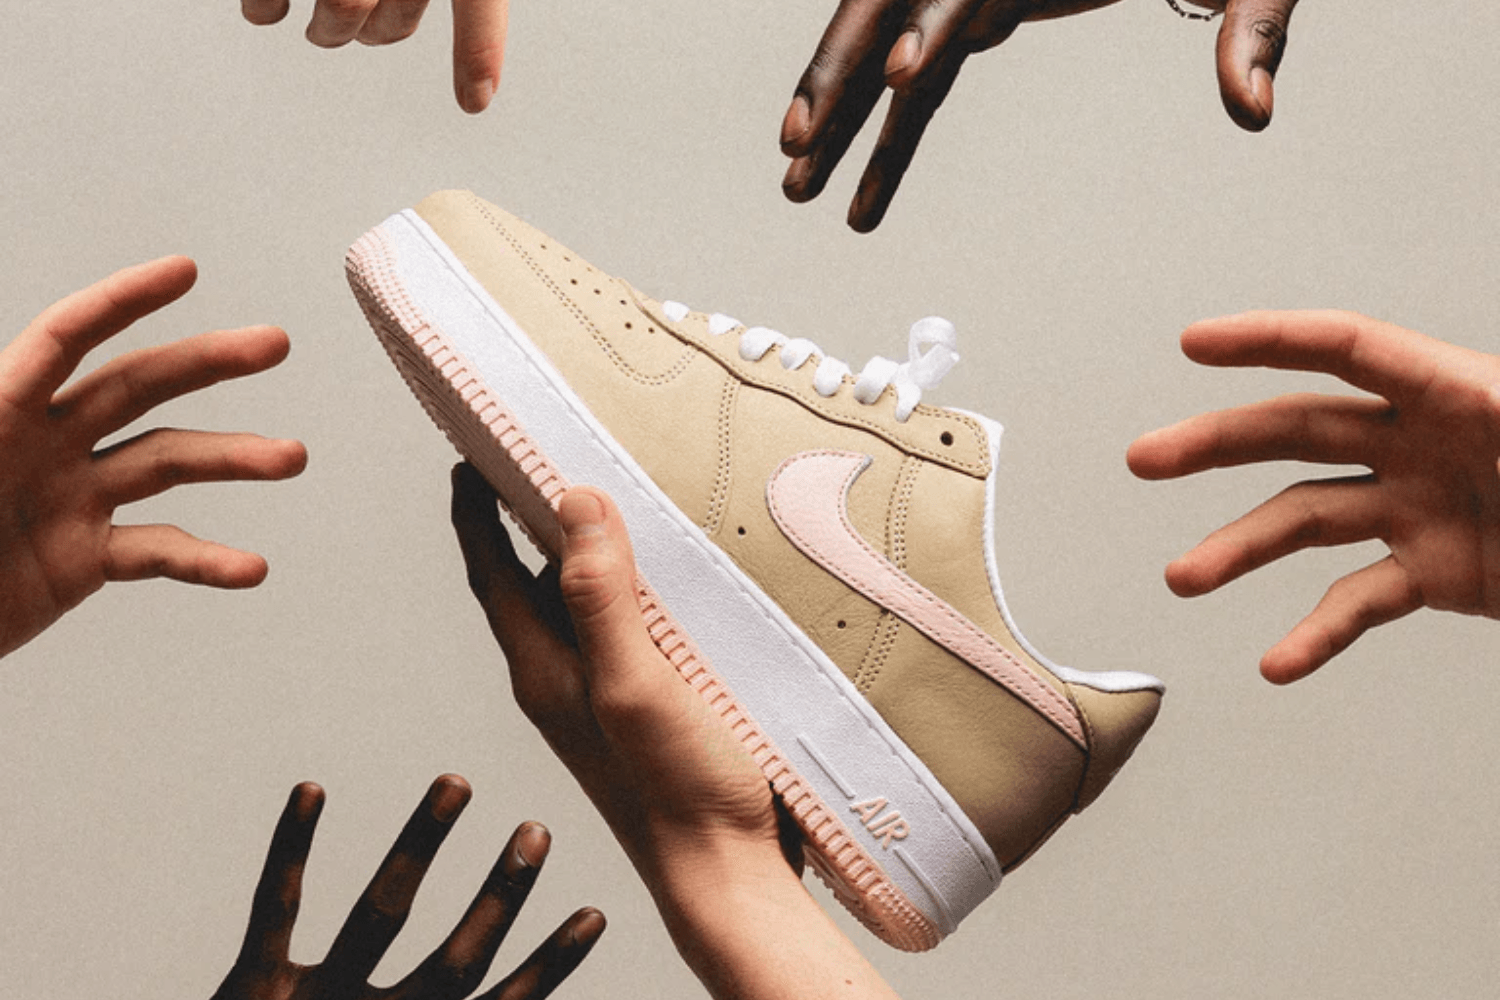 Where to cop: Nike Air Force 1 Low Retro 'Linen'